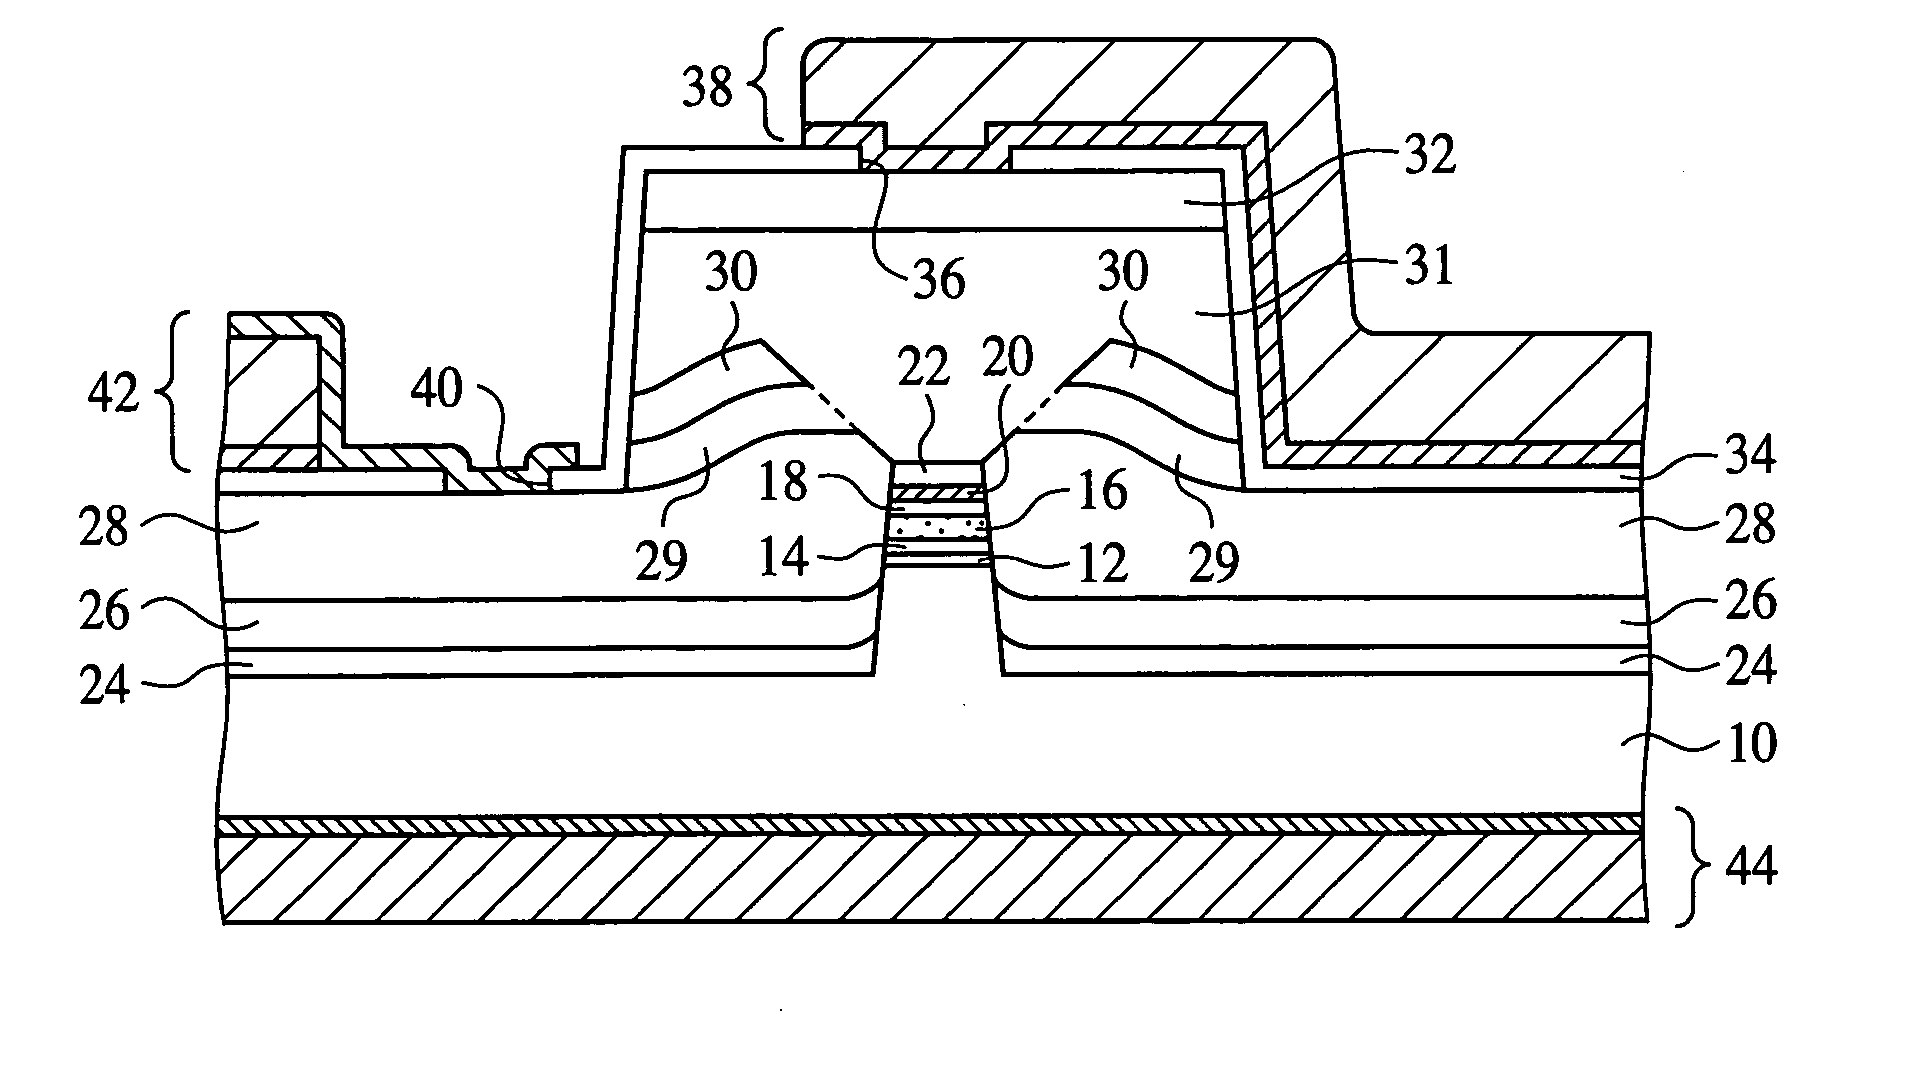 Photosemiconductor device